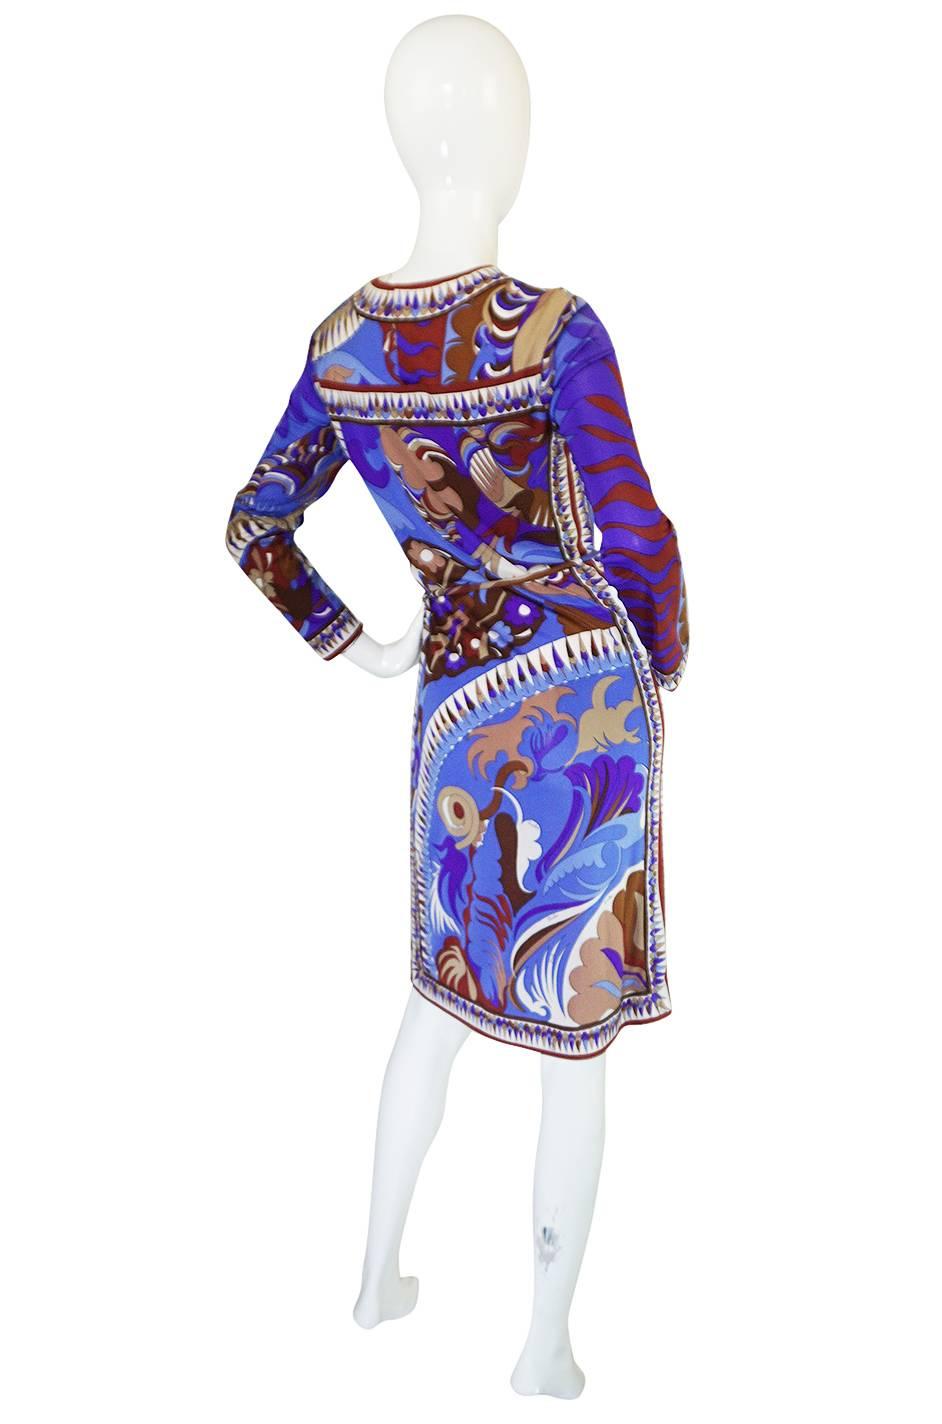 What a beautiful Pucci dress that is constructed from one of his signature silk jerseys with a bright pattern in a coveted mix of blues, lavender and taupes that absolutely pops off the black backdrop. The bodice skims over the bust right down to